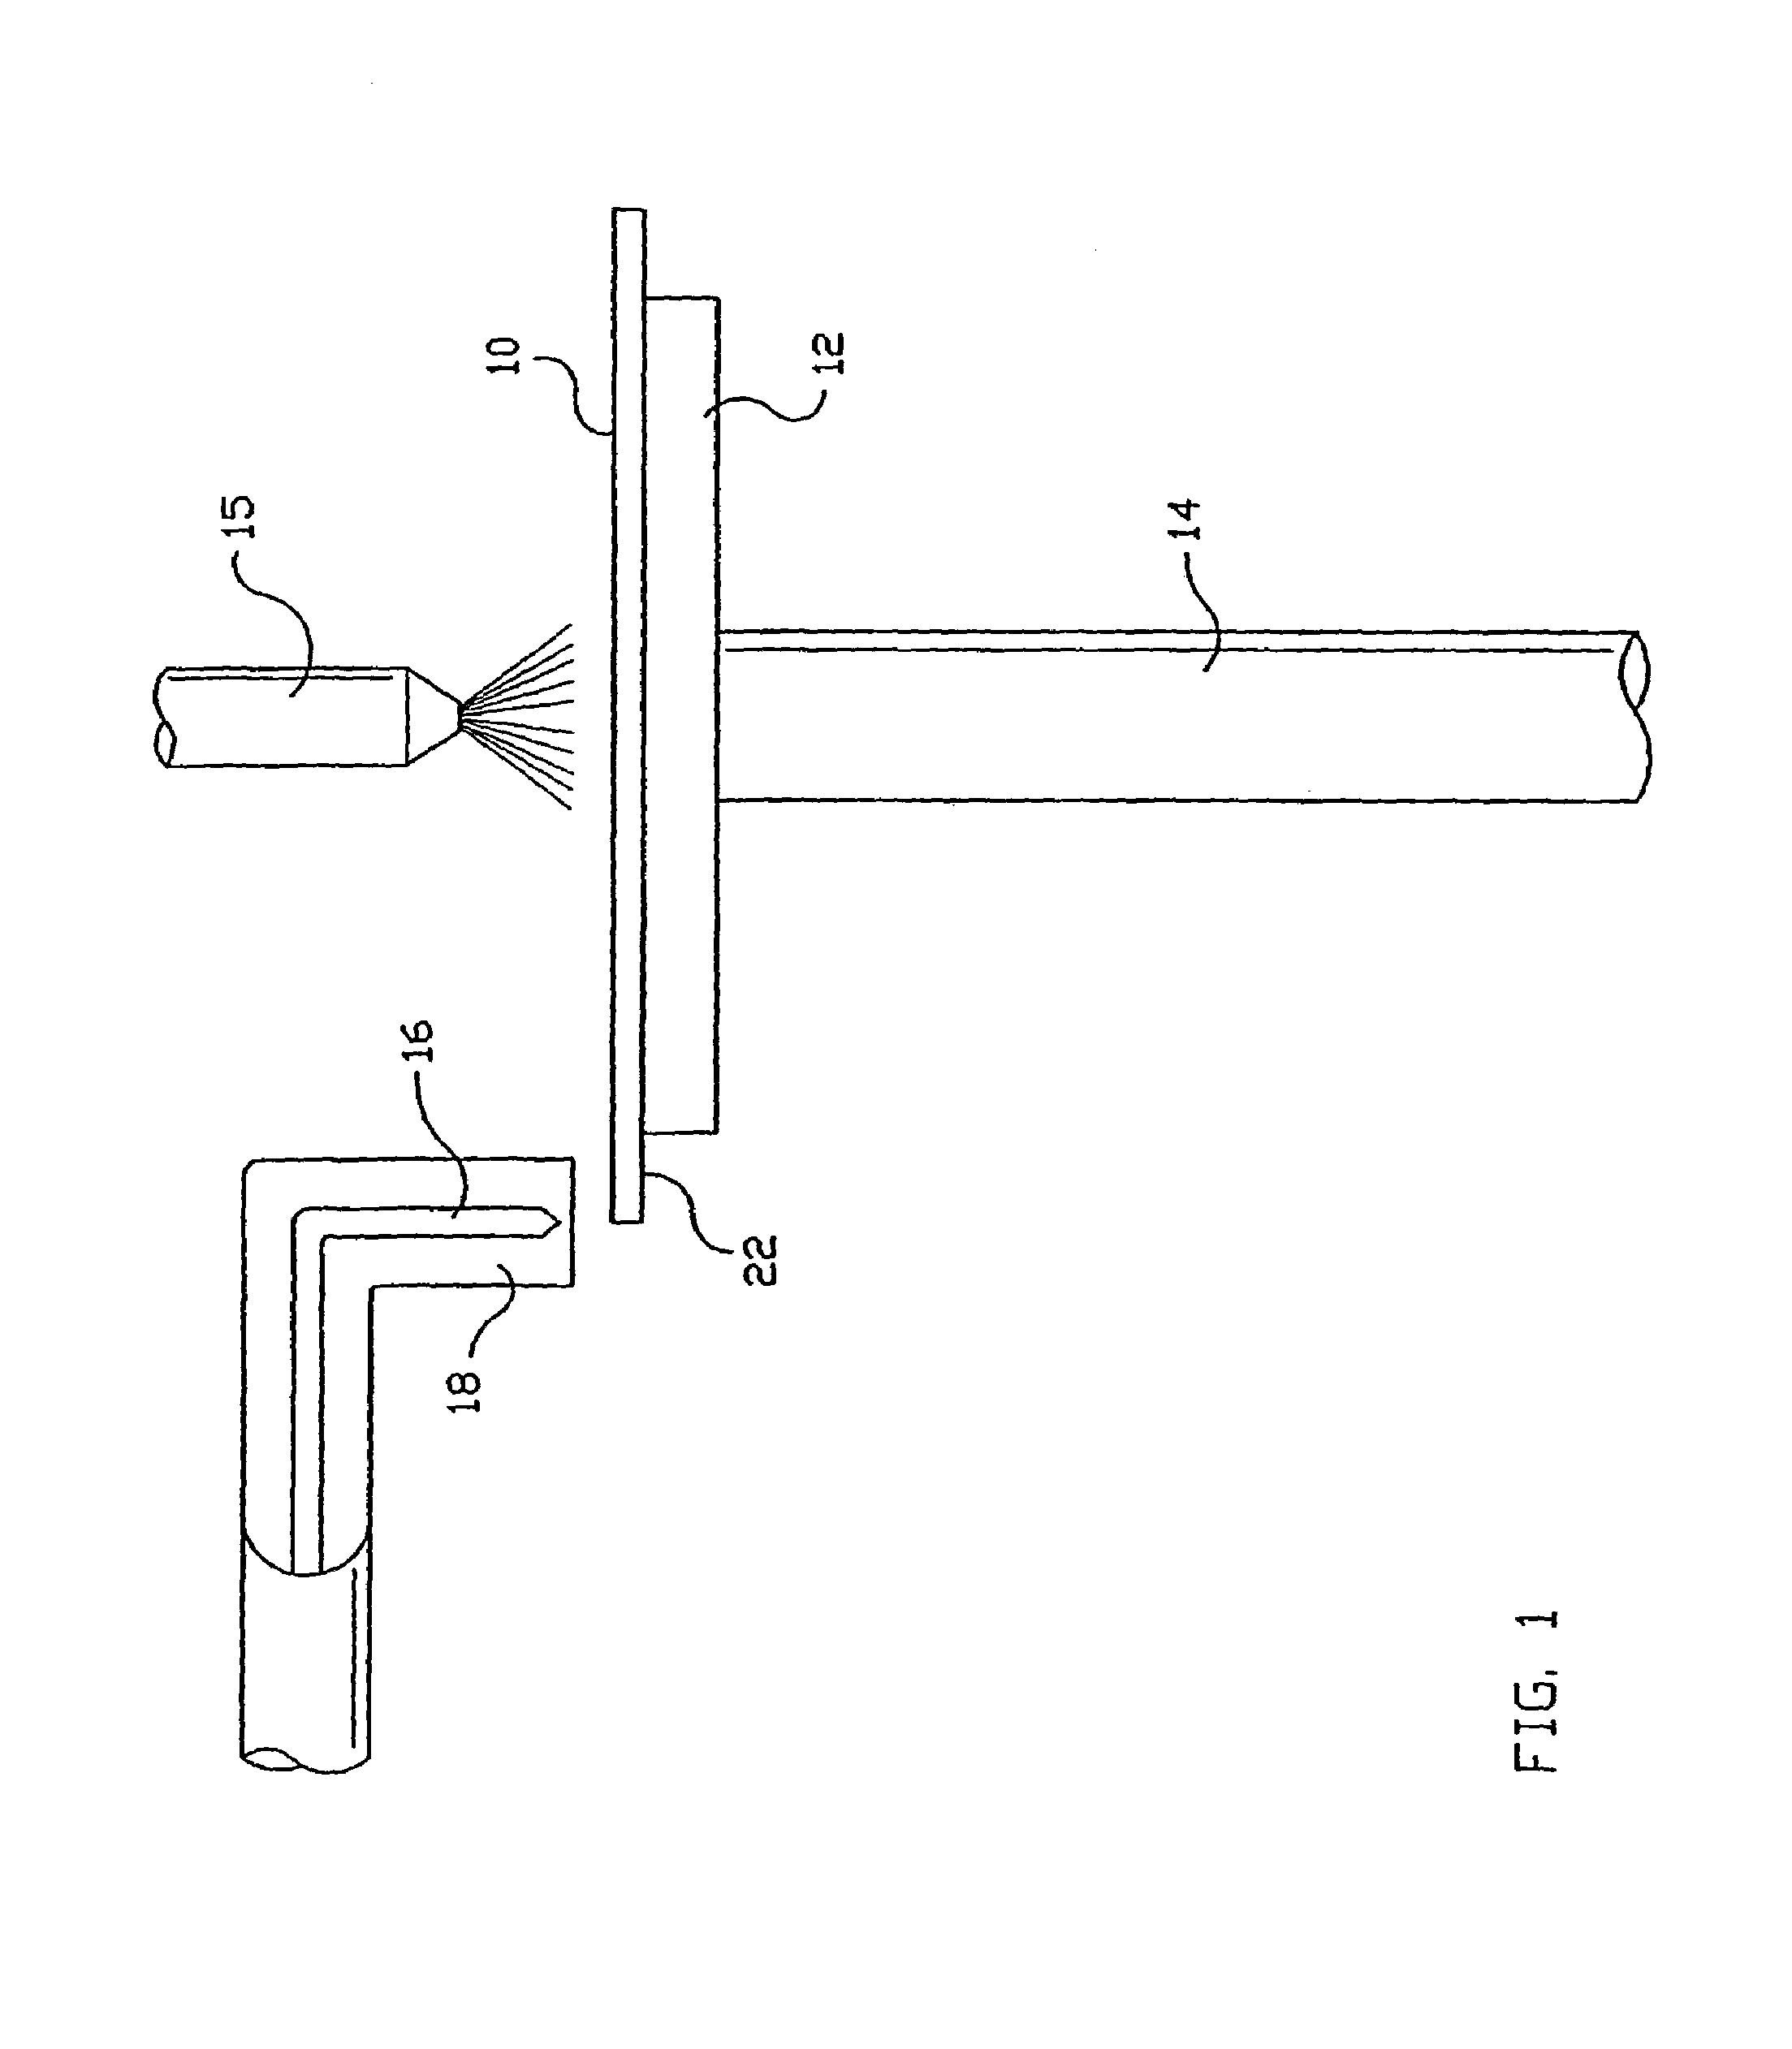 Chemical dispensing system for semiconductor wafer processing